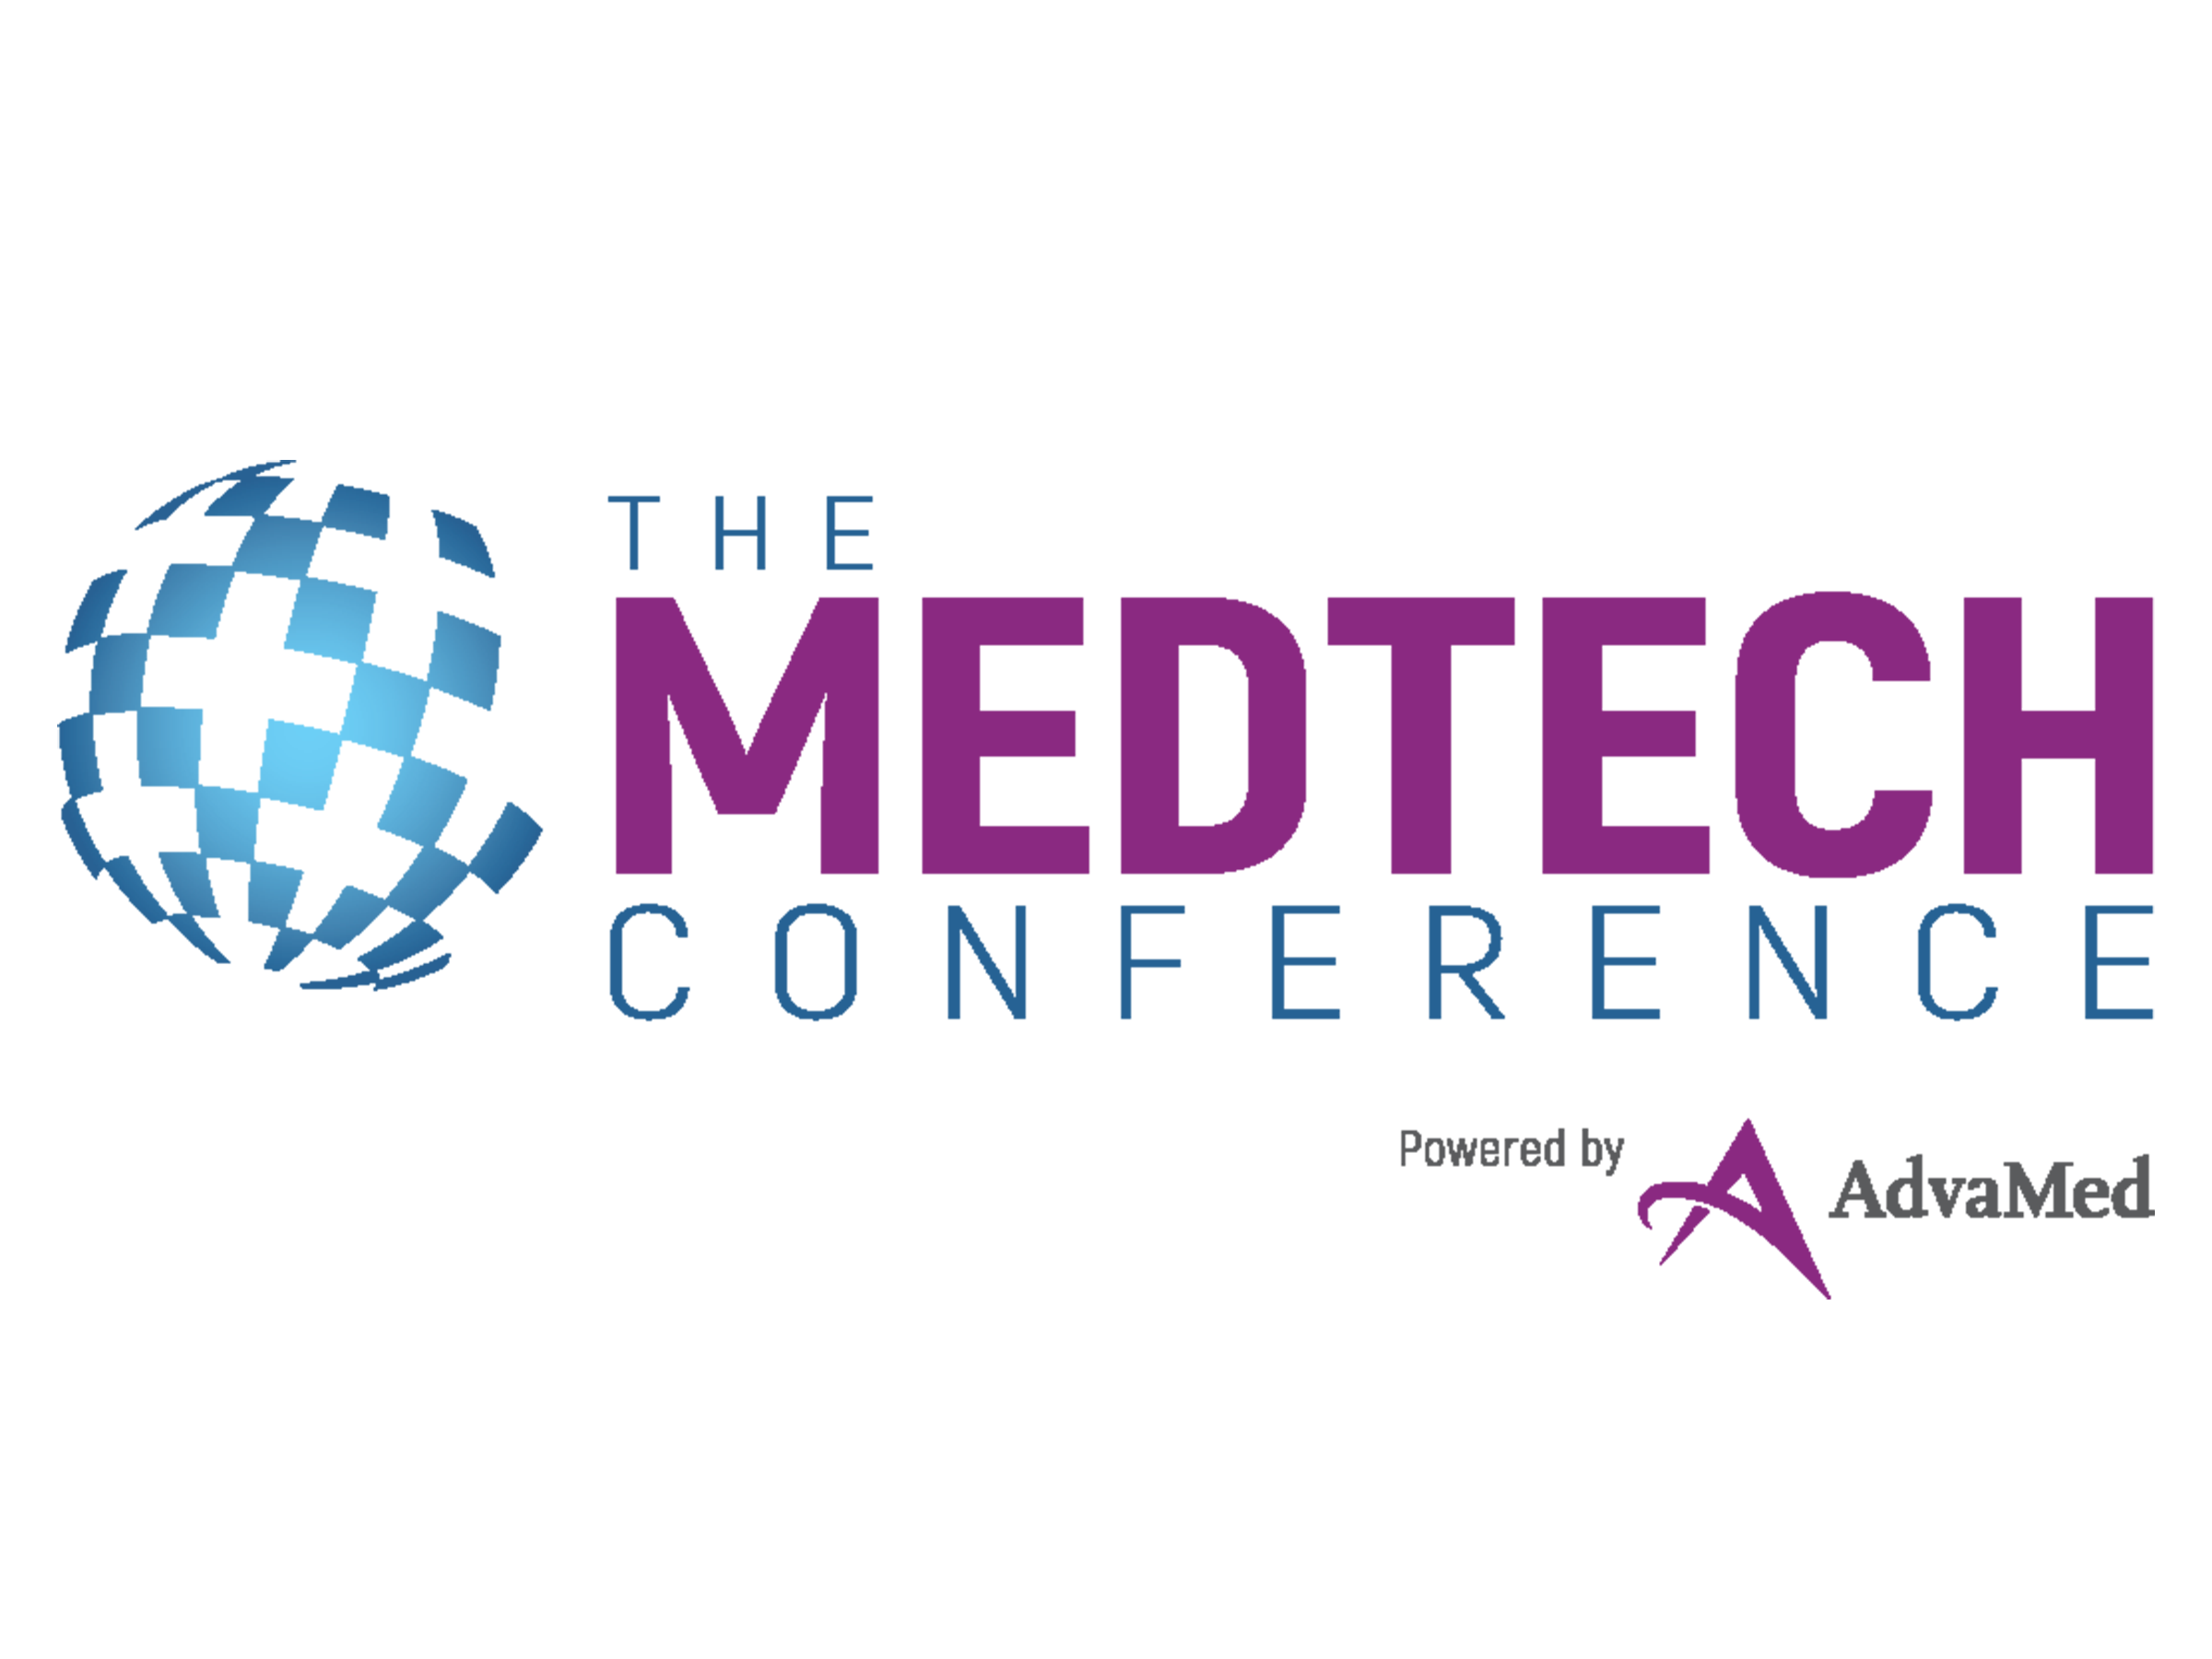 Selected as Top Five Finalist  for the MedTech Innovator Execution Award Competition